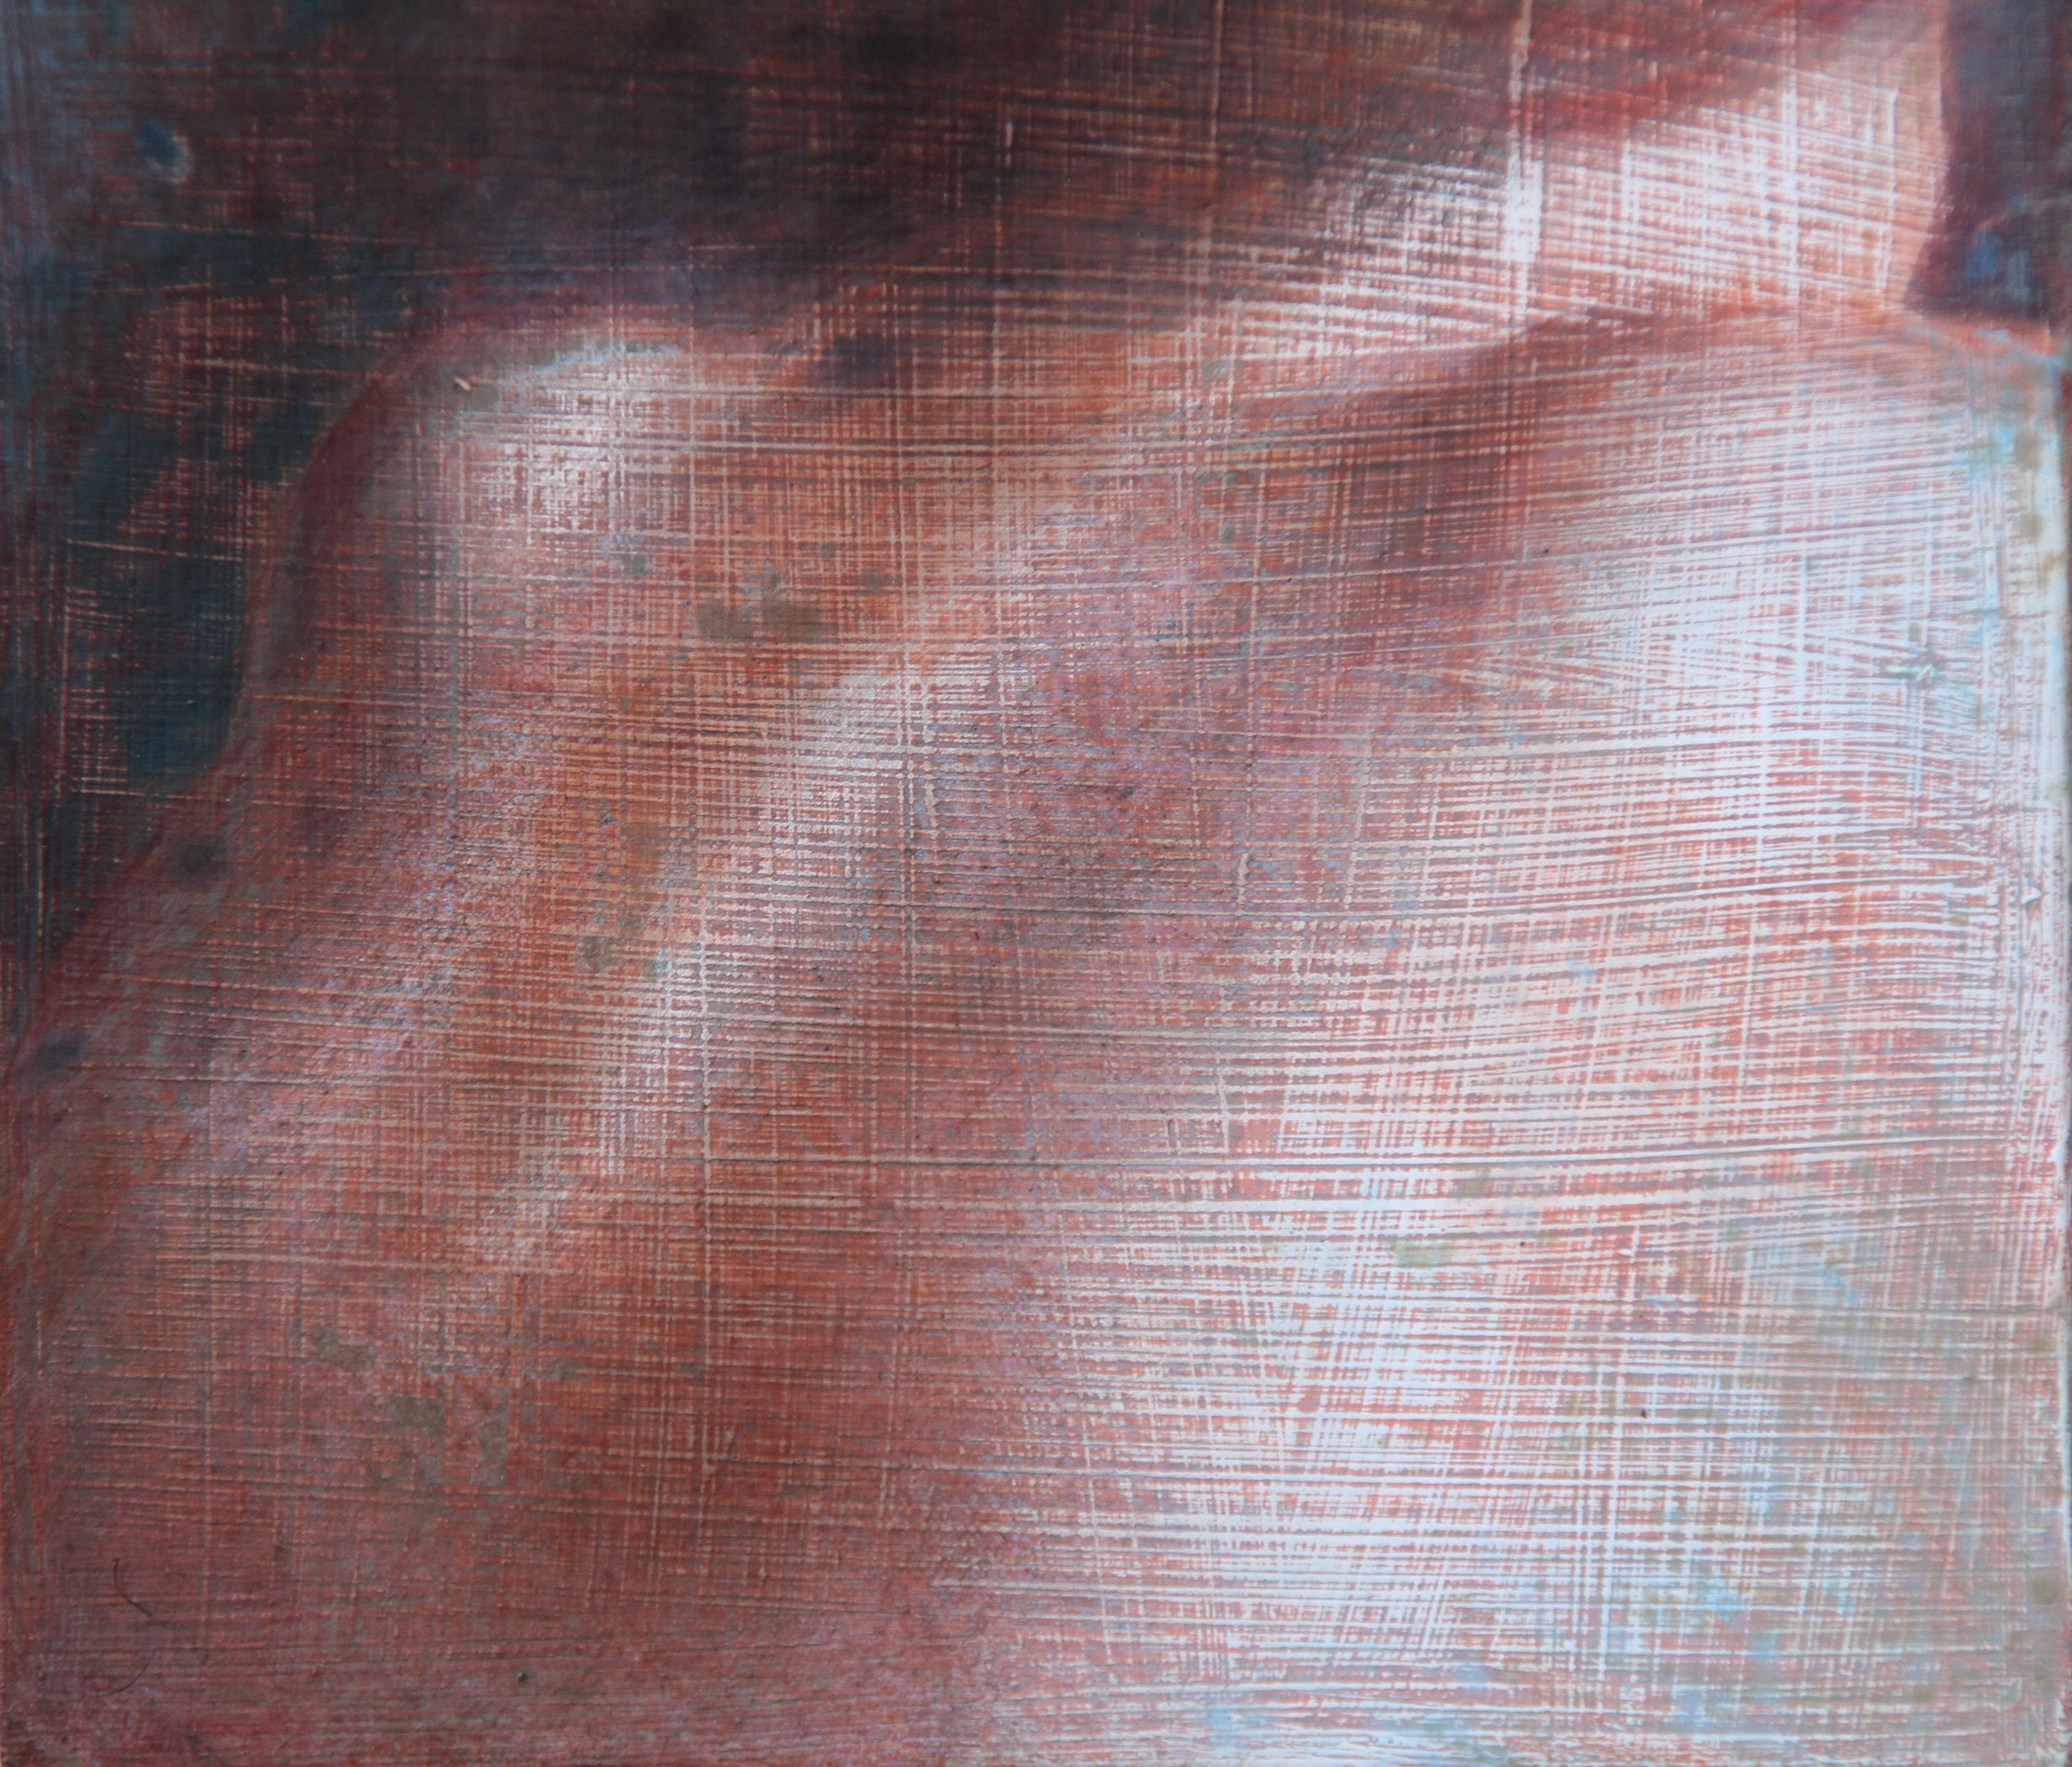 Fragment 8 (dreamy woman back skin female figurative painting soft Earth tones) - Post-Impressionist Painting by Rudolf Kosow